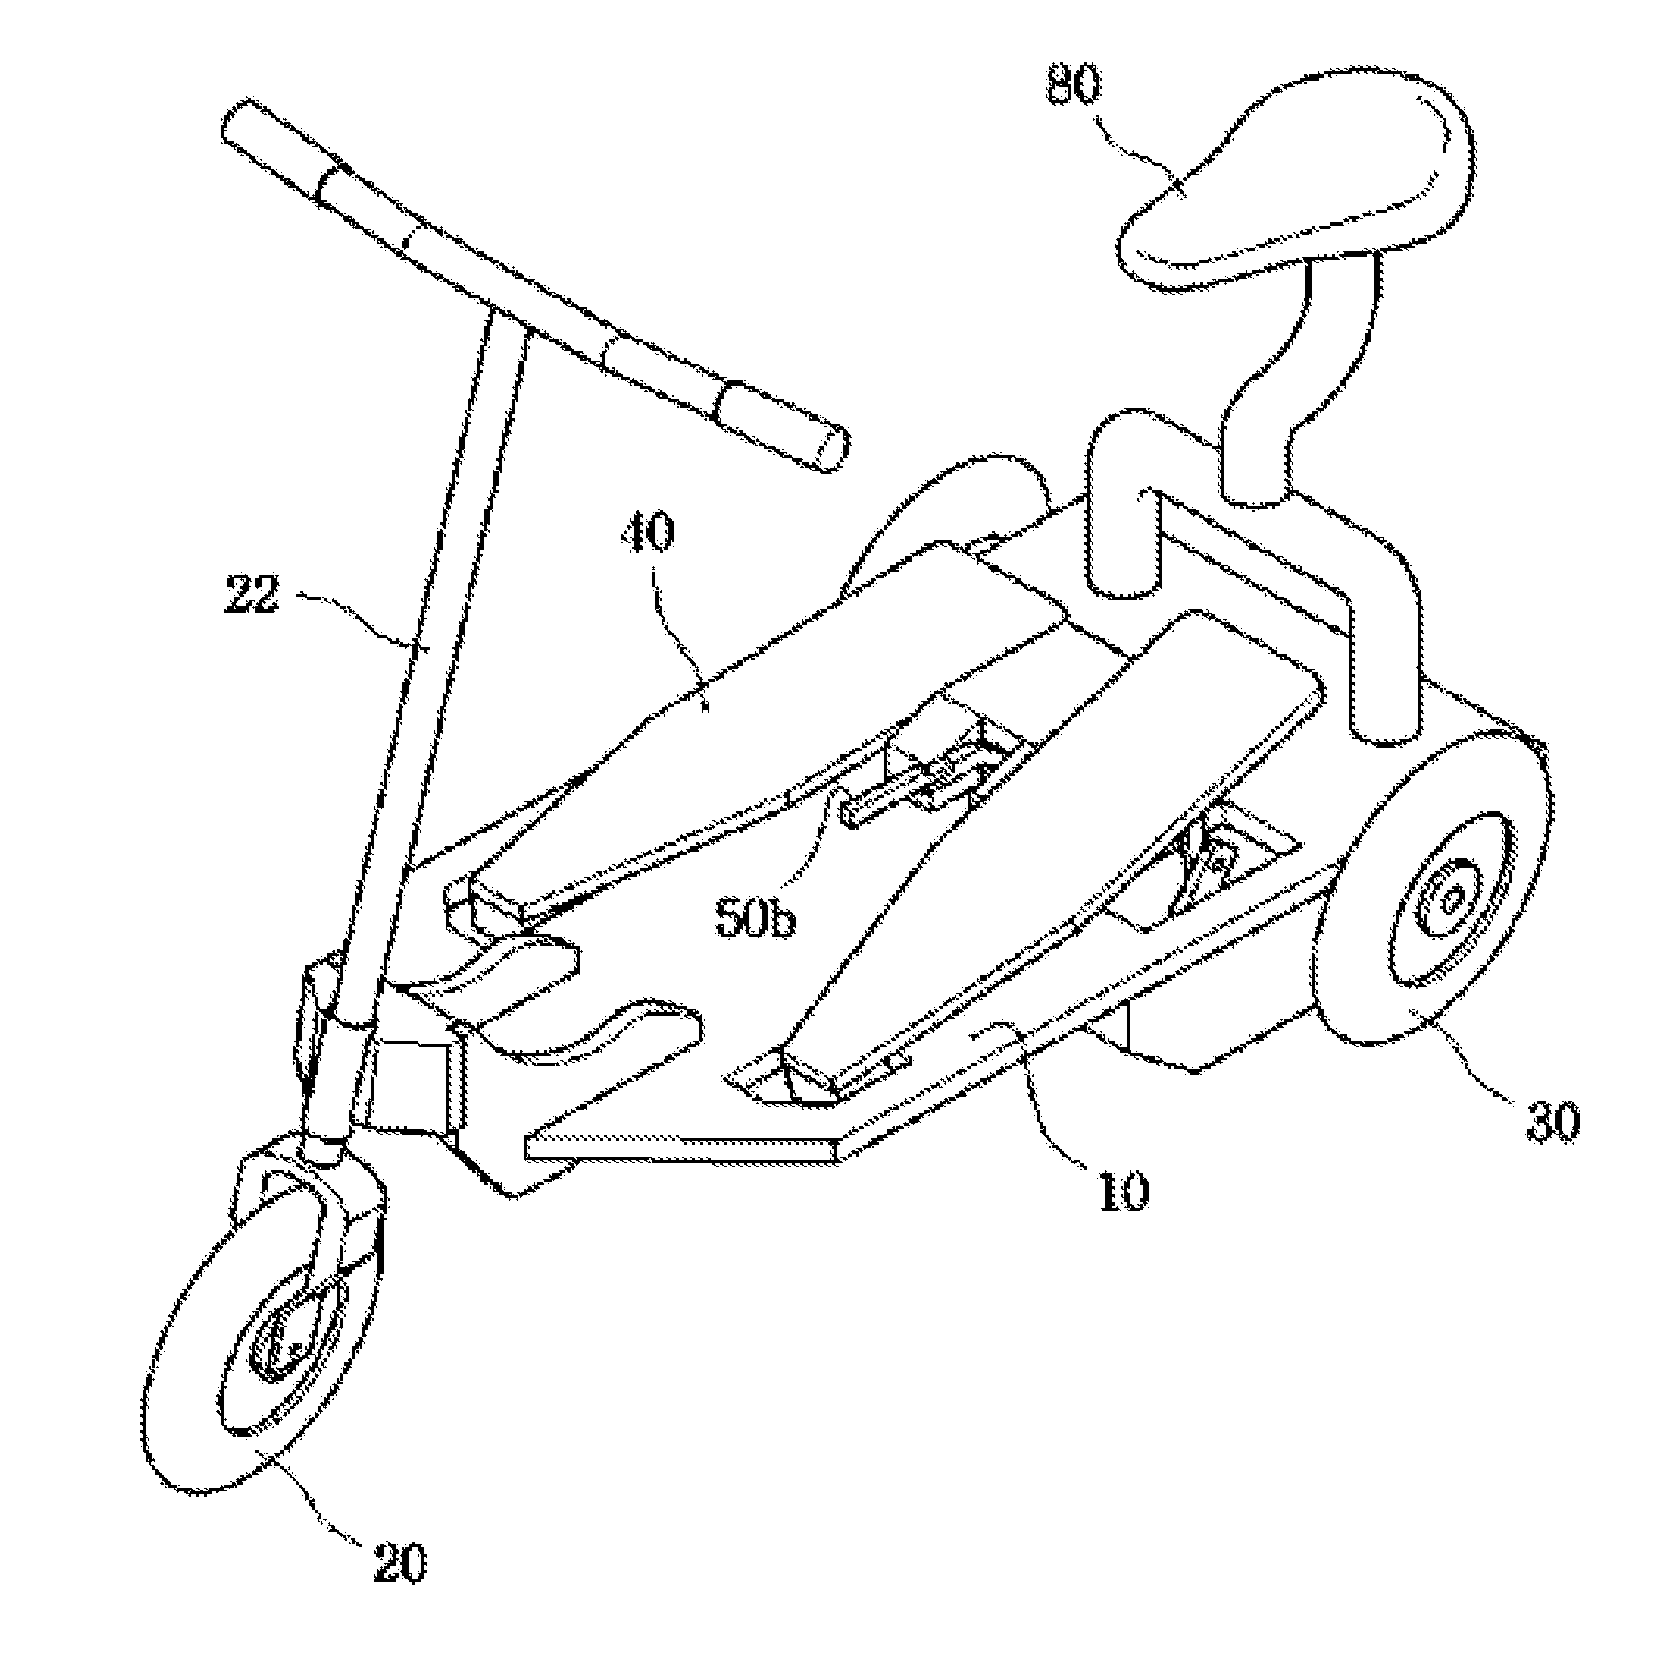 Pedal-driven roller board